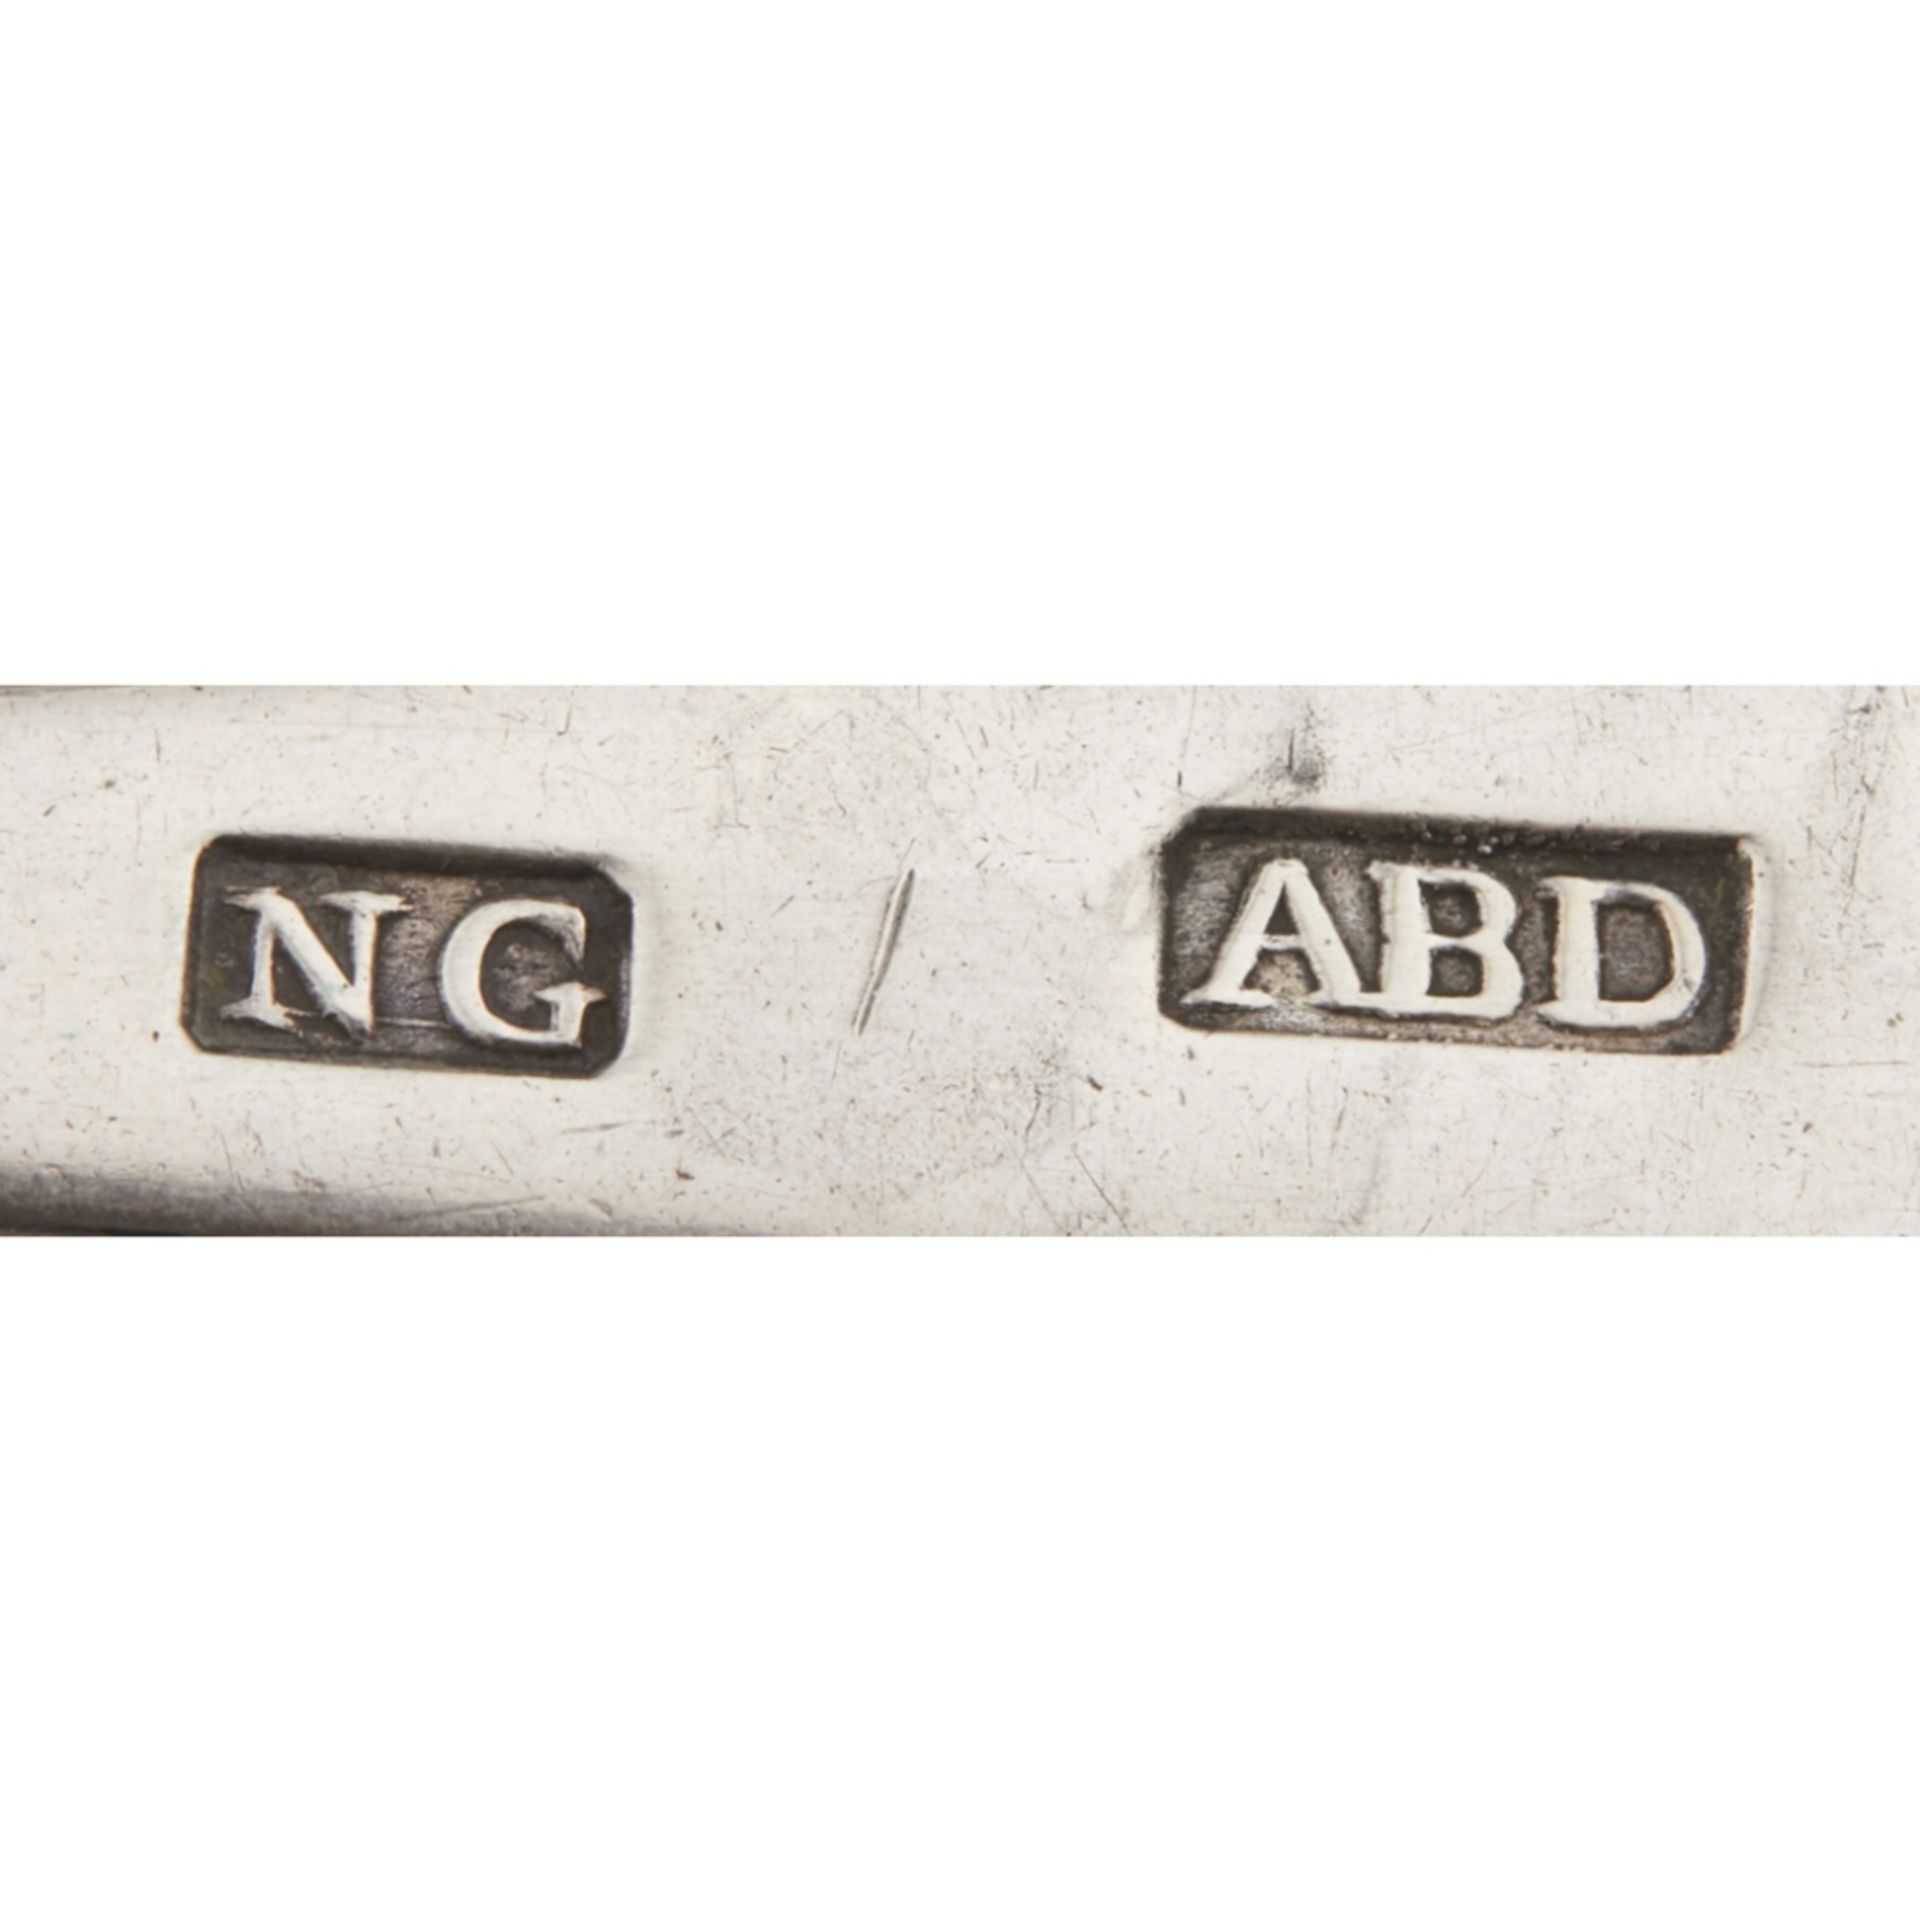 ABERDEEN - A SET OF FOUR SCOTTISH PROVINCIAL TABLESPOONS NATHANIAL GILLET marked NG, ABDN, of Old - Image 7 of 9